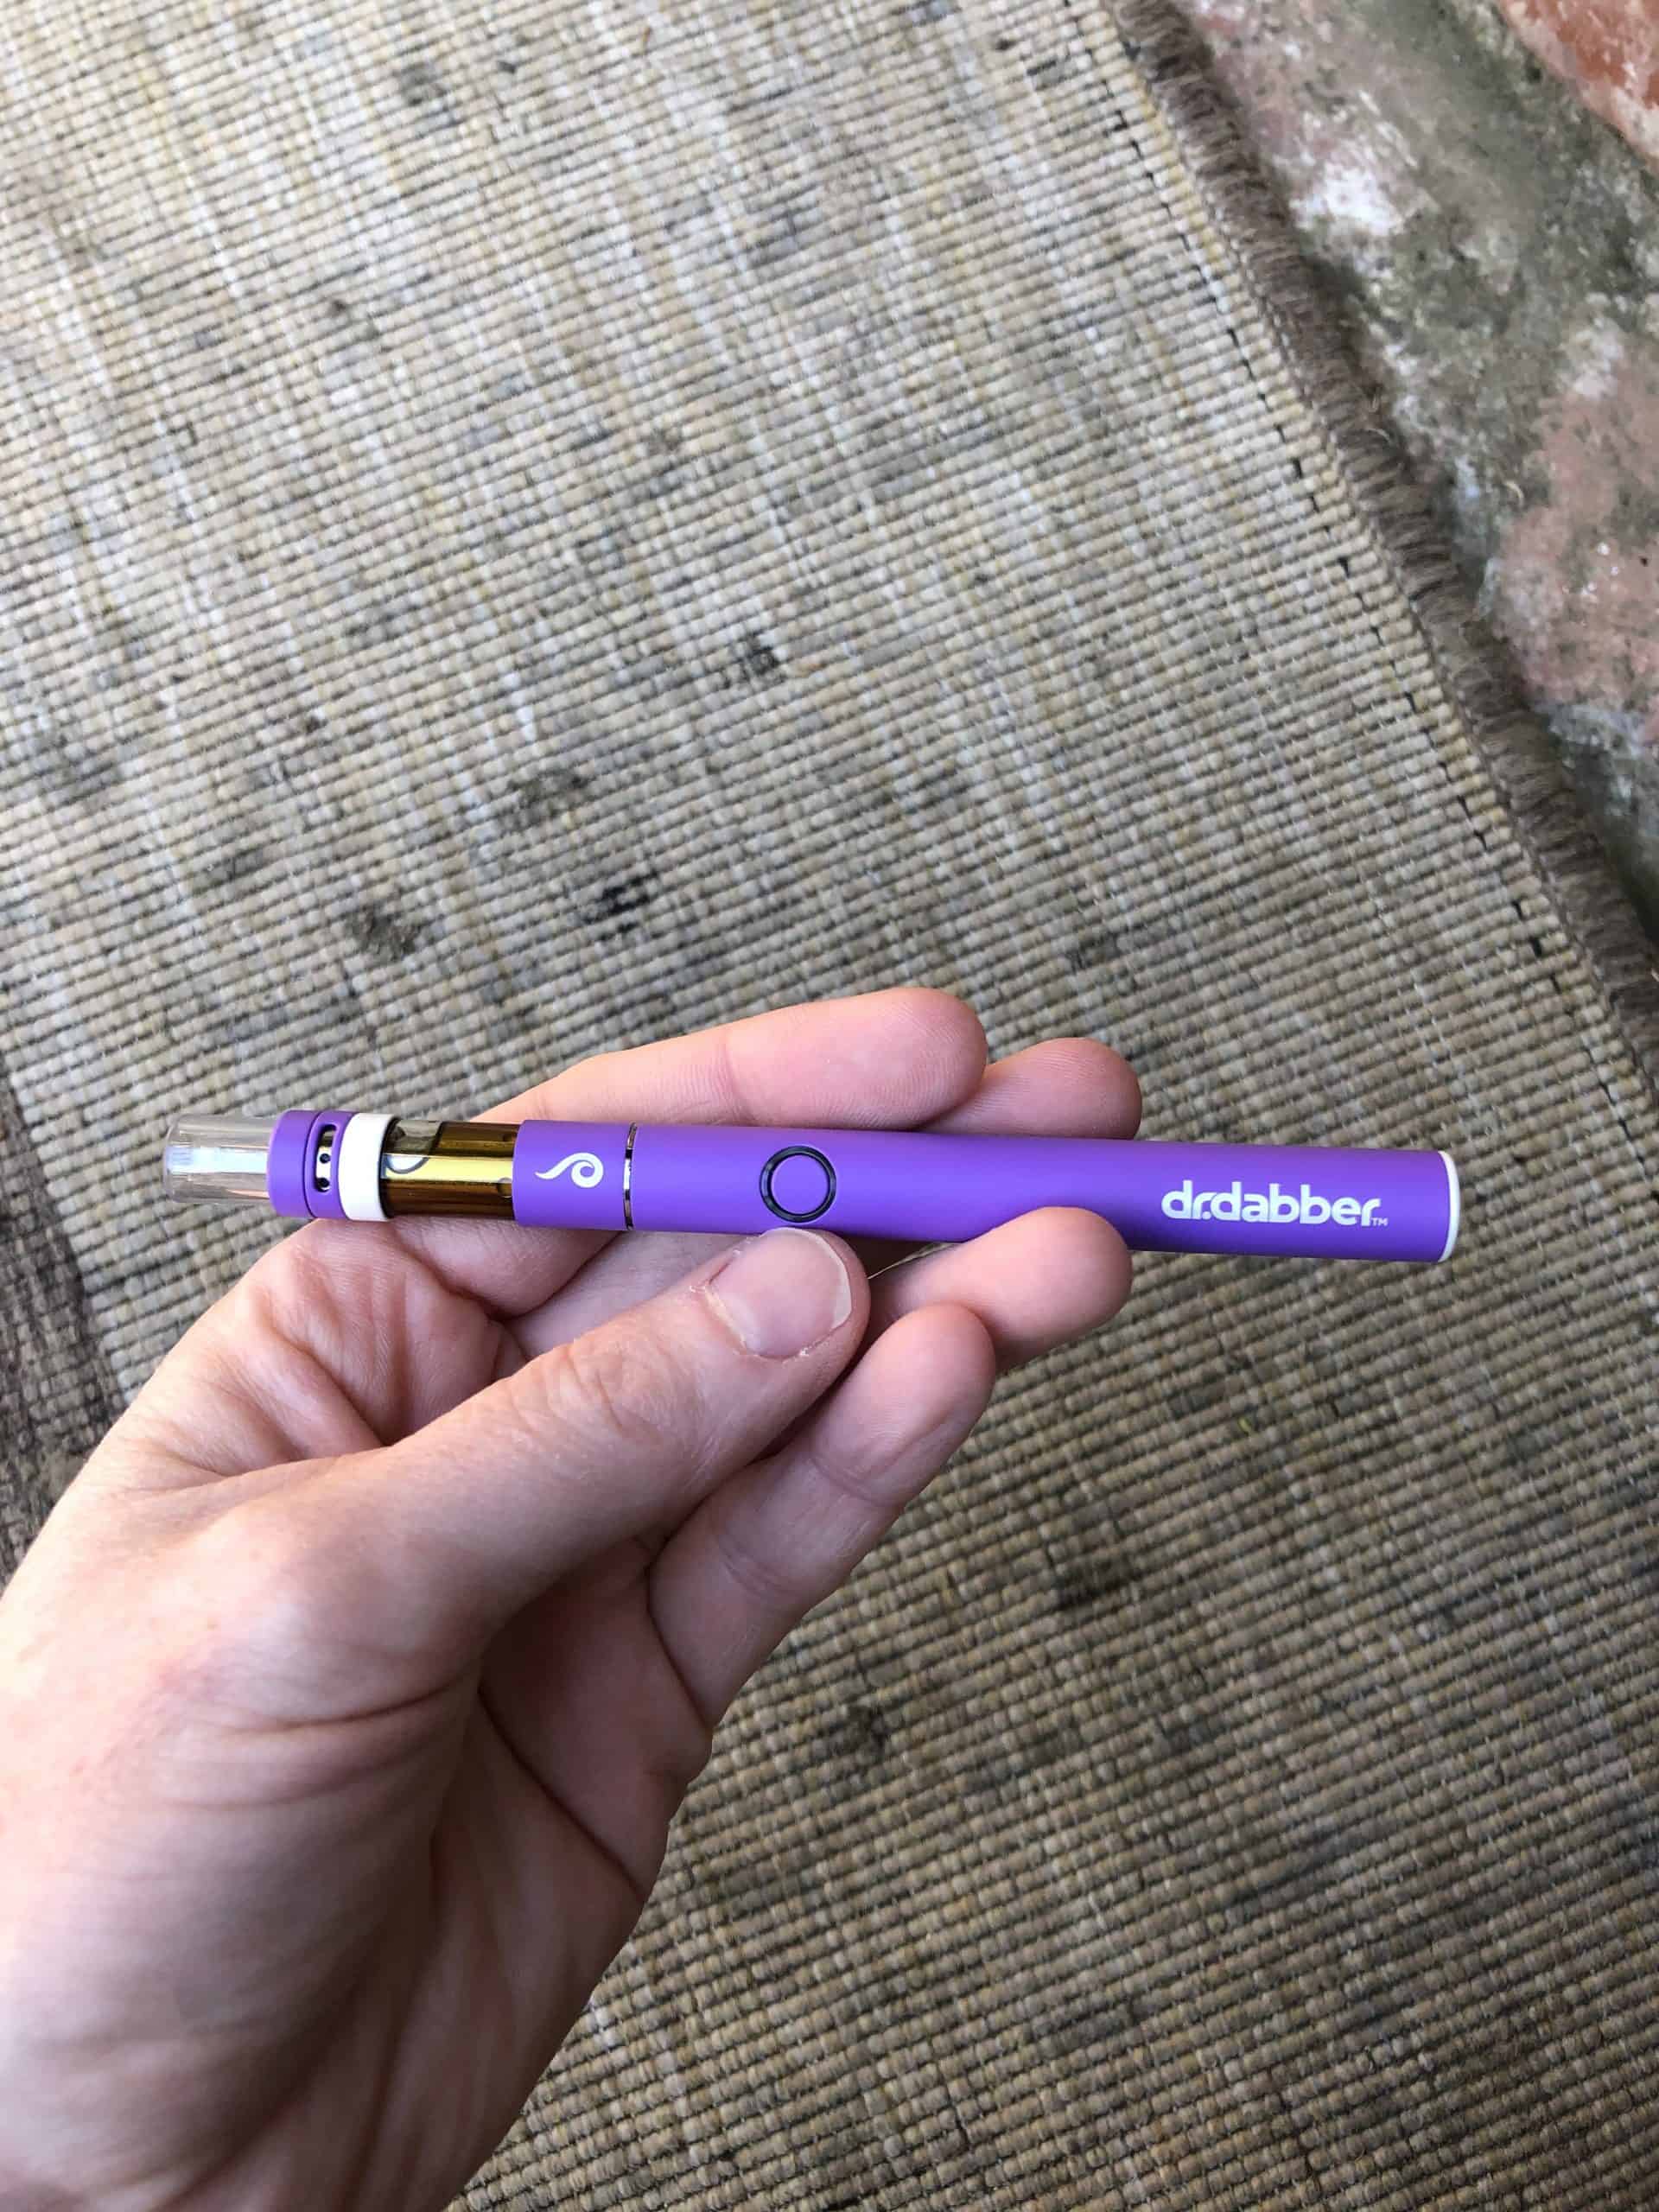 dr dabber cbd cartridge and battery robust blend review save on cannabis testing process